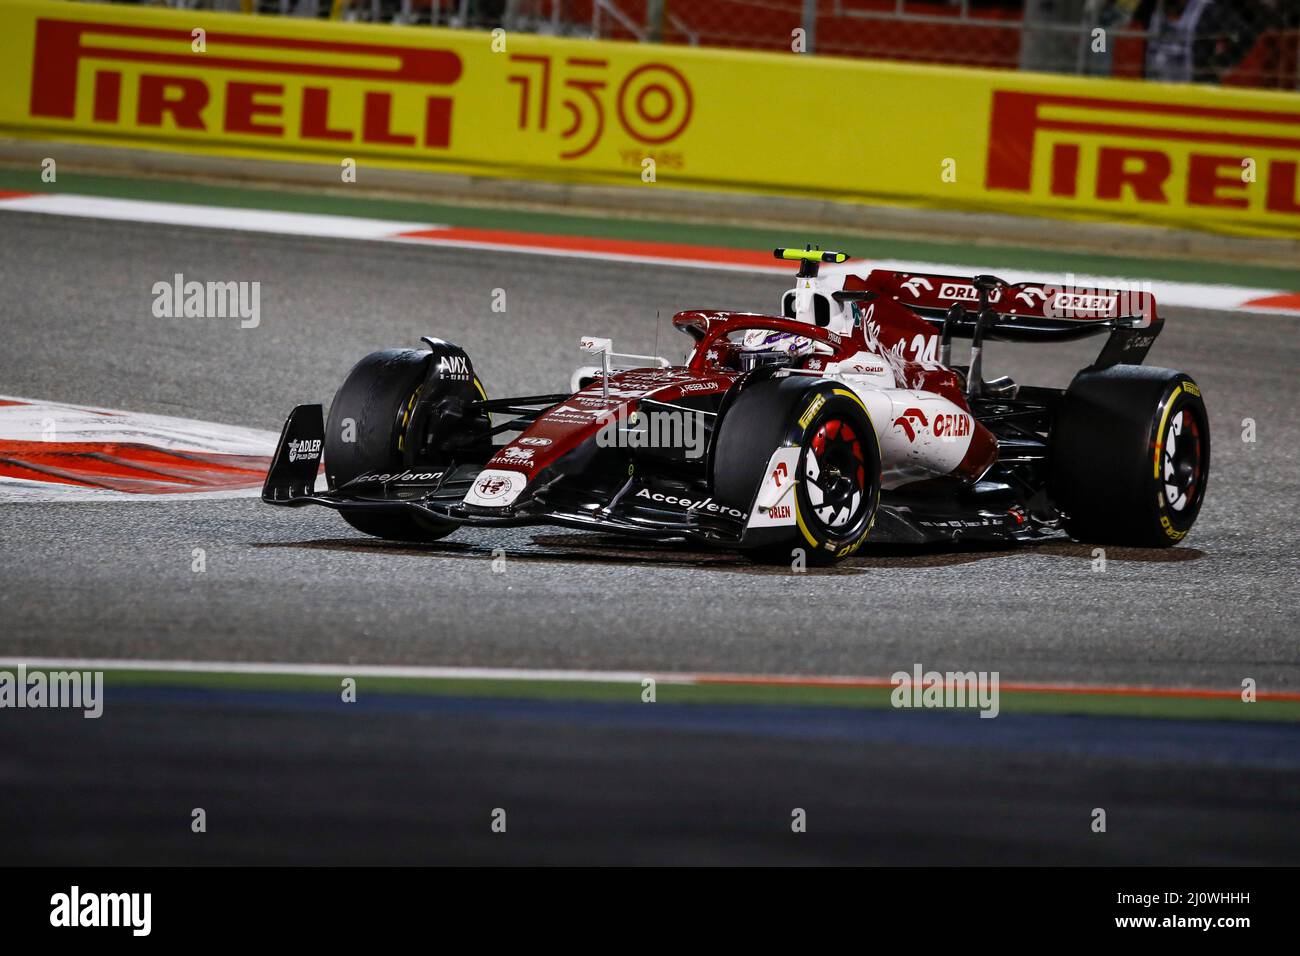 (220321) -- SAKHIR, March 21, 2022 (Xinhua) -- Alfa Romeo's Chinese driver Zhou Guanyu competes during the Bahrain Formula One Grand Prix at the Bahrain International Circuit in the city of Sakhir on March 20, 2022. (DPPI/Handout via Xinhua) Stock Photo